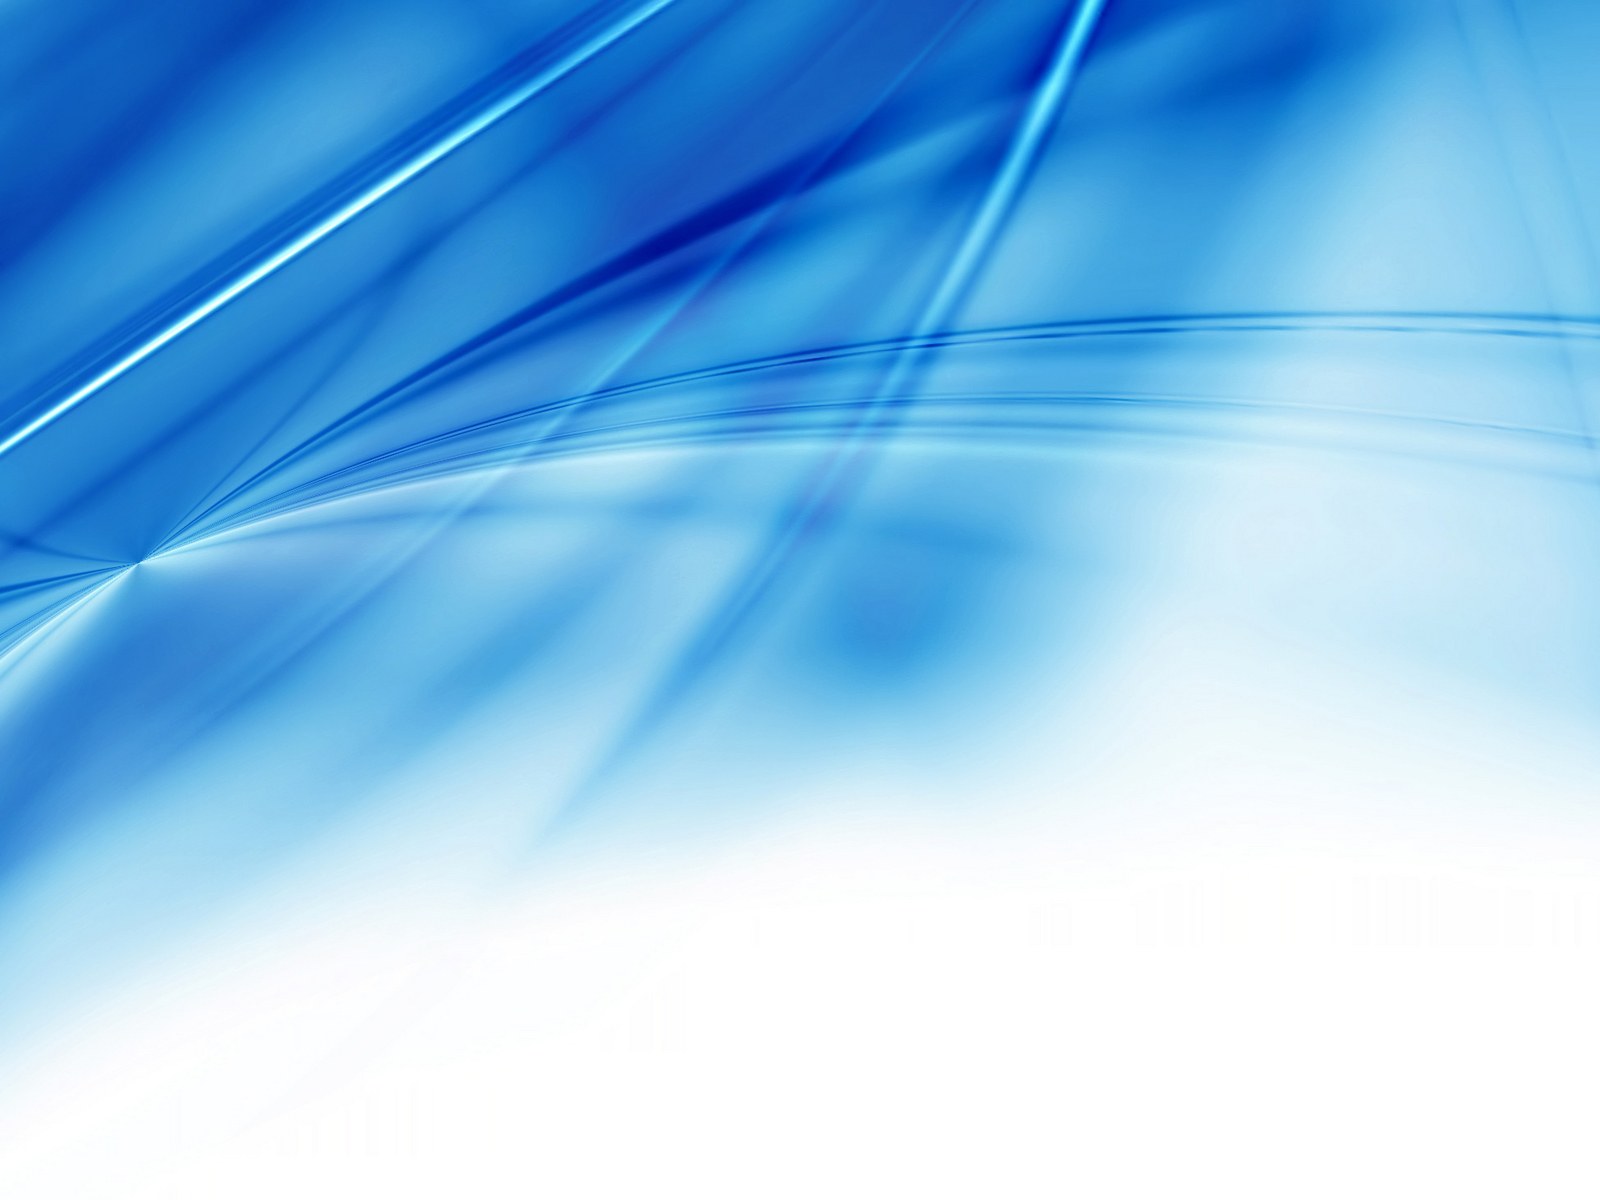 Available Wallpaper: Blue Abstract Wallpapers